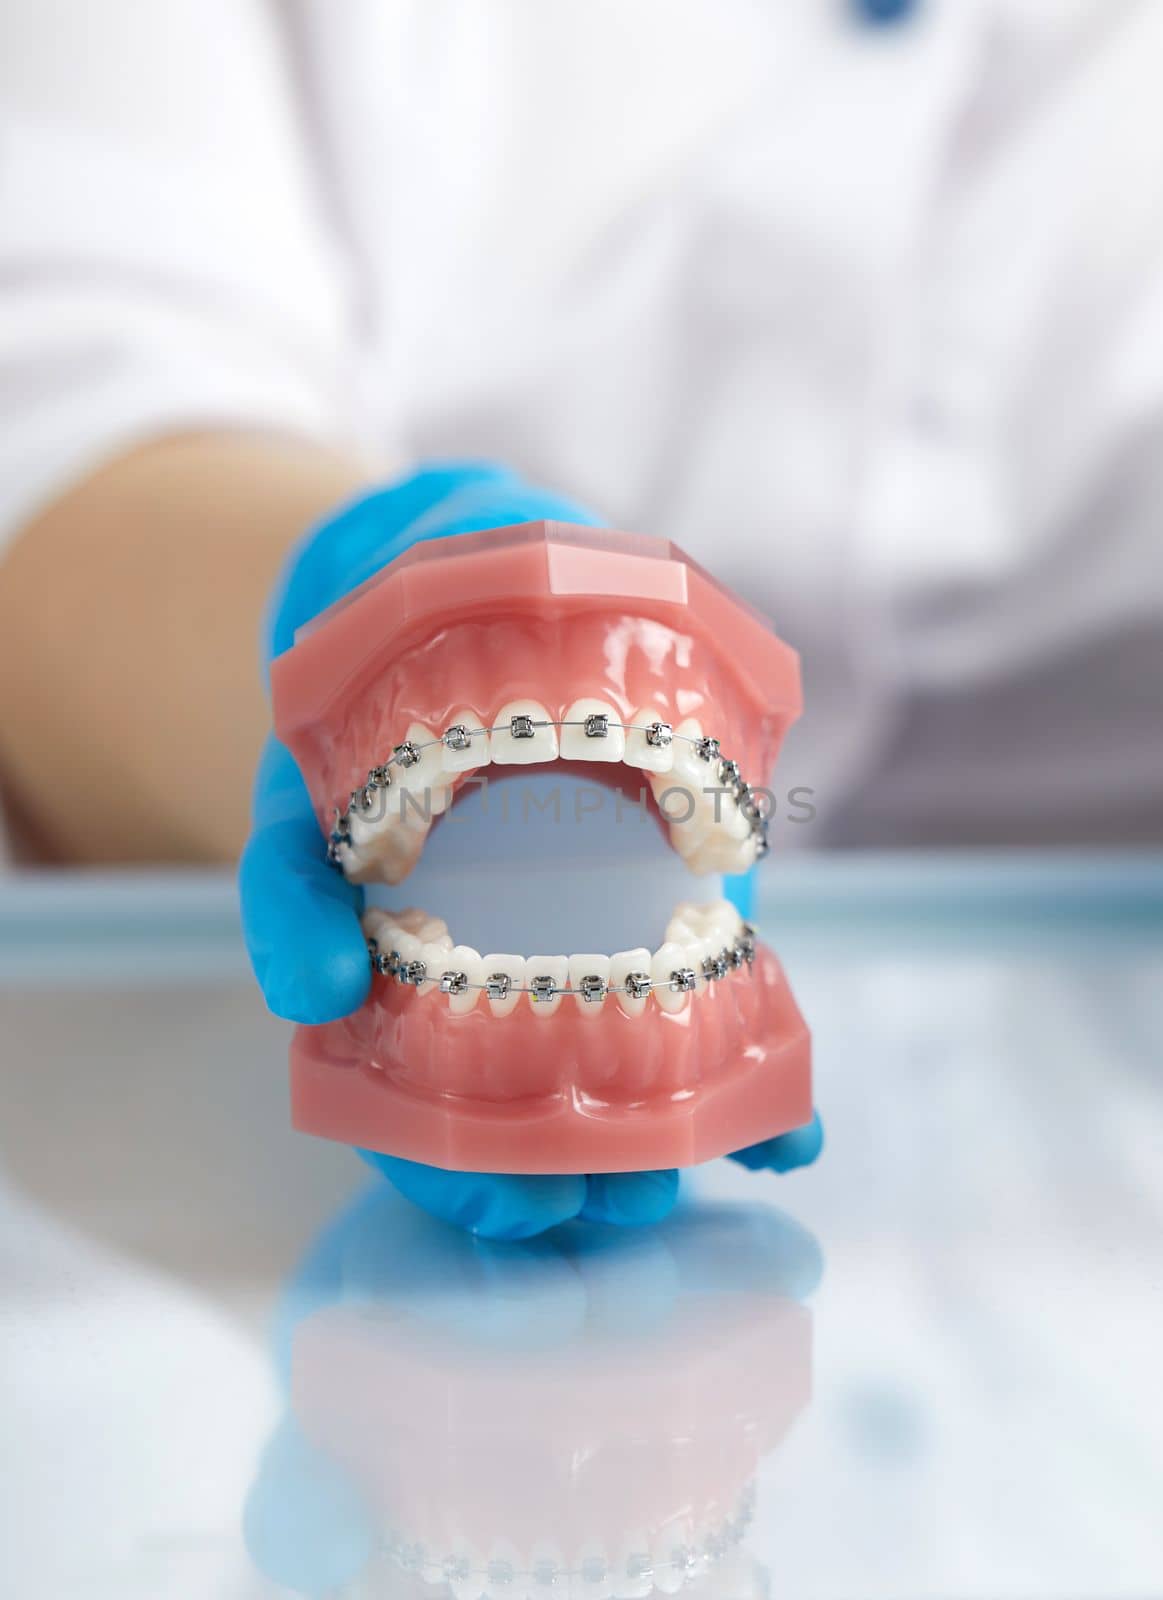 Orthodontist shows how the system of braces on teeth is arranged on an artificial jaws